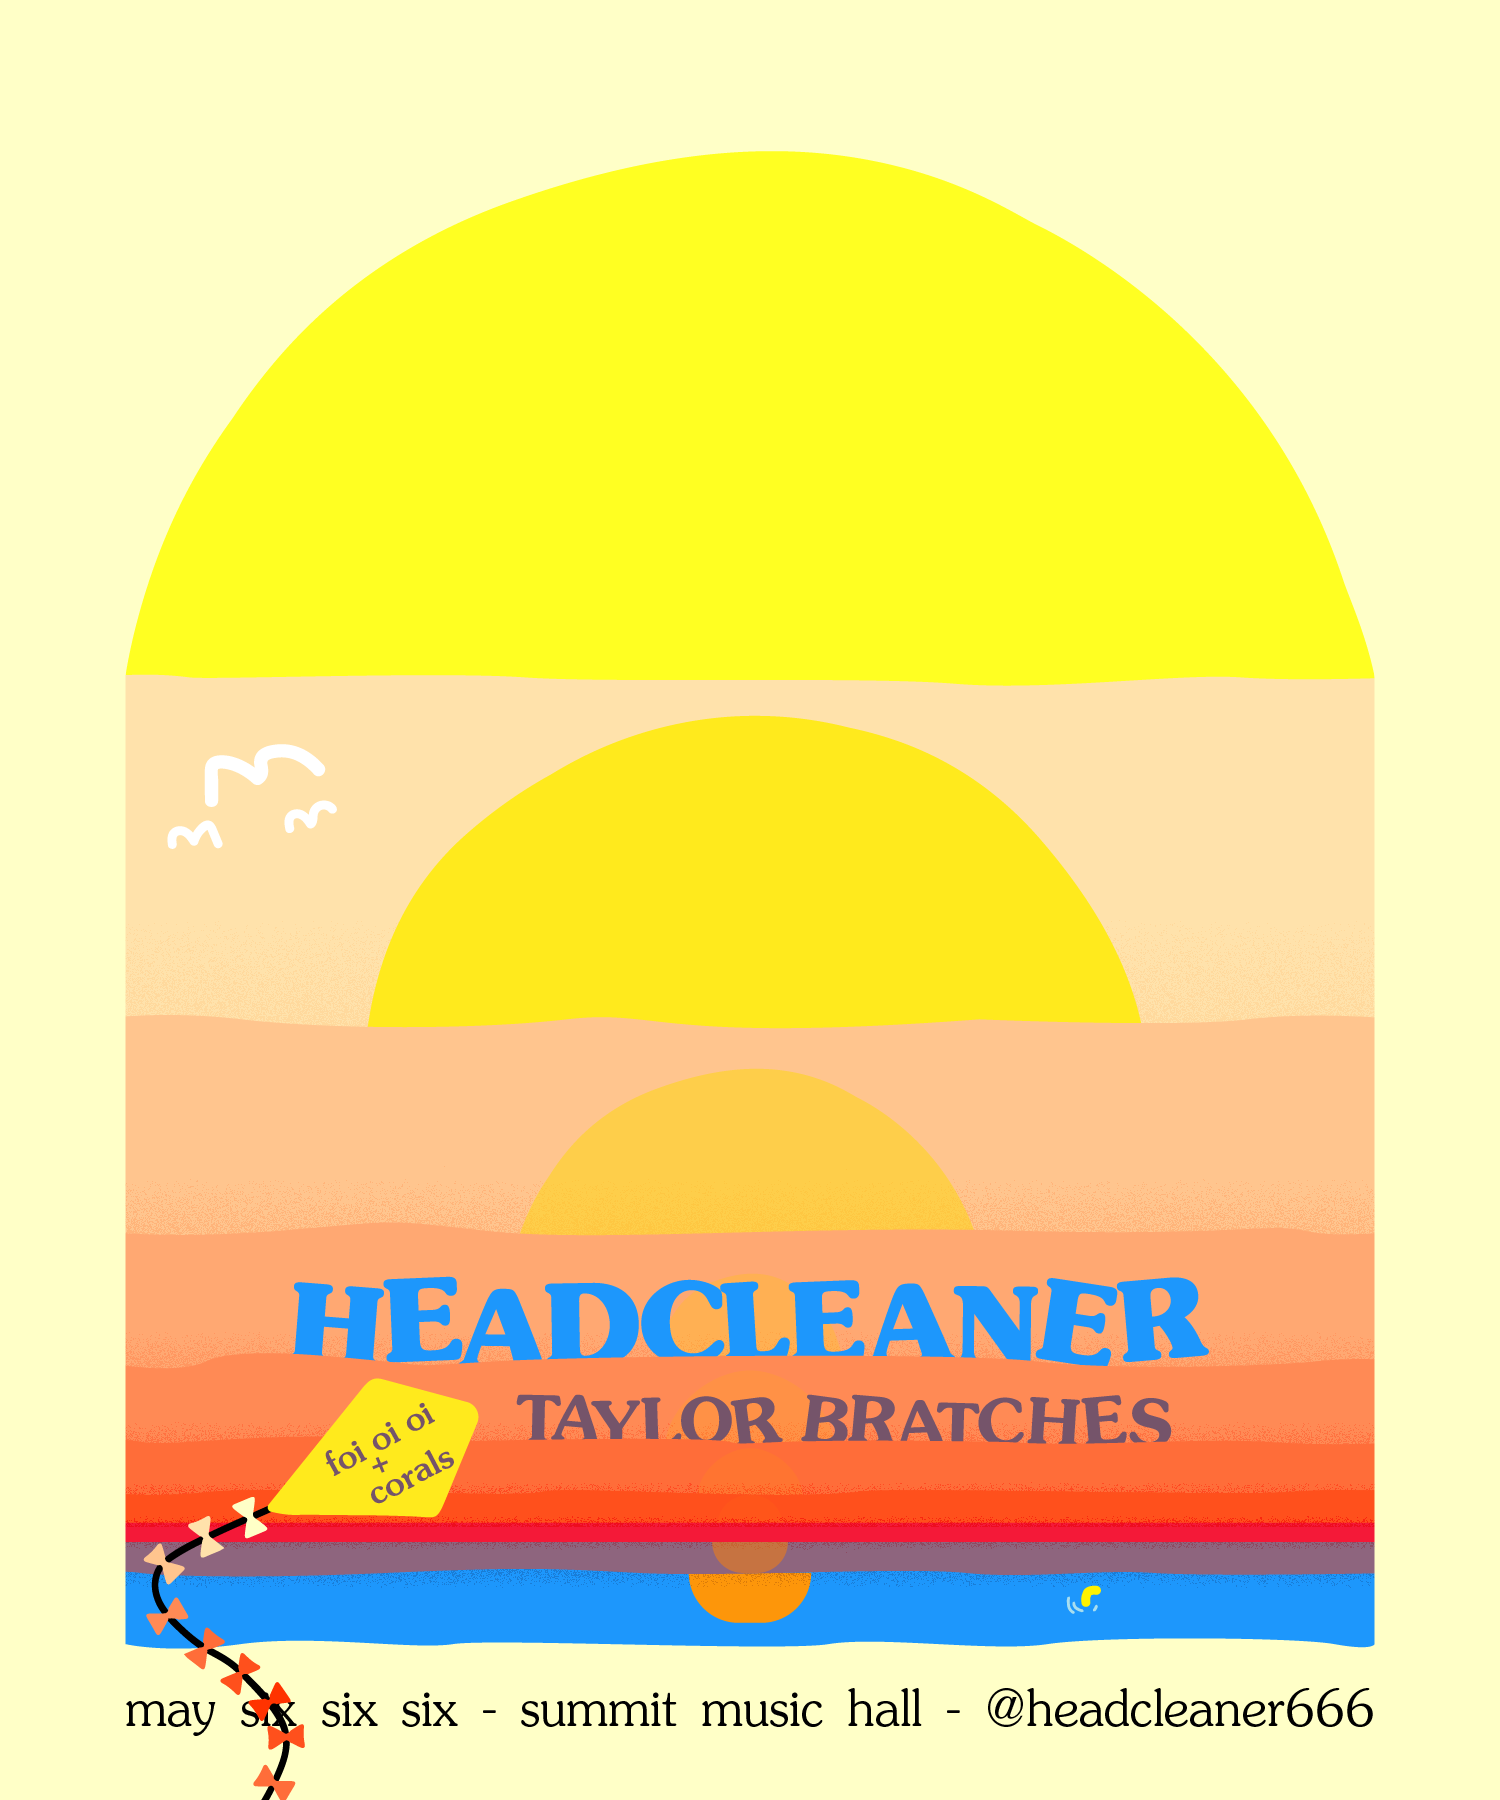 Headcleaner - Taylor Bratches - フライヤー表